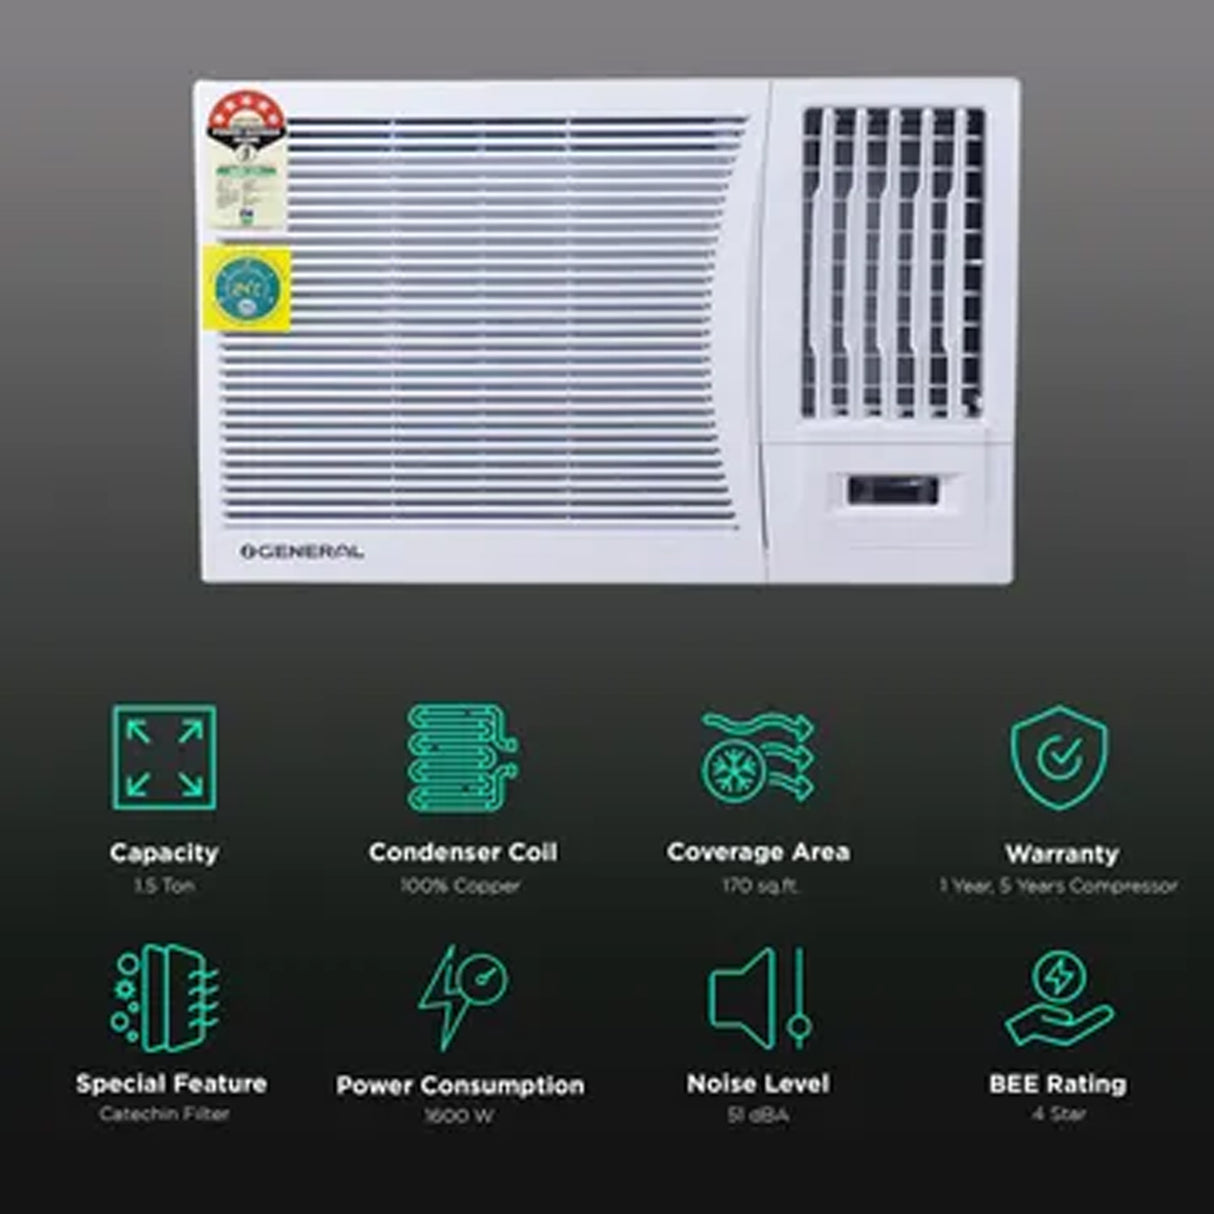 O General 1.5 Ton 4-Star Window AC - Experience superior cooling with Copper Condenser technology.